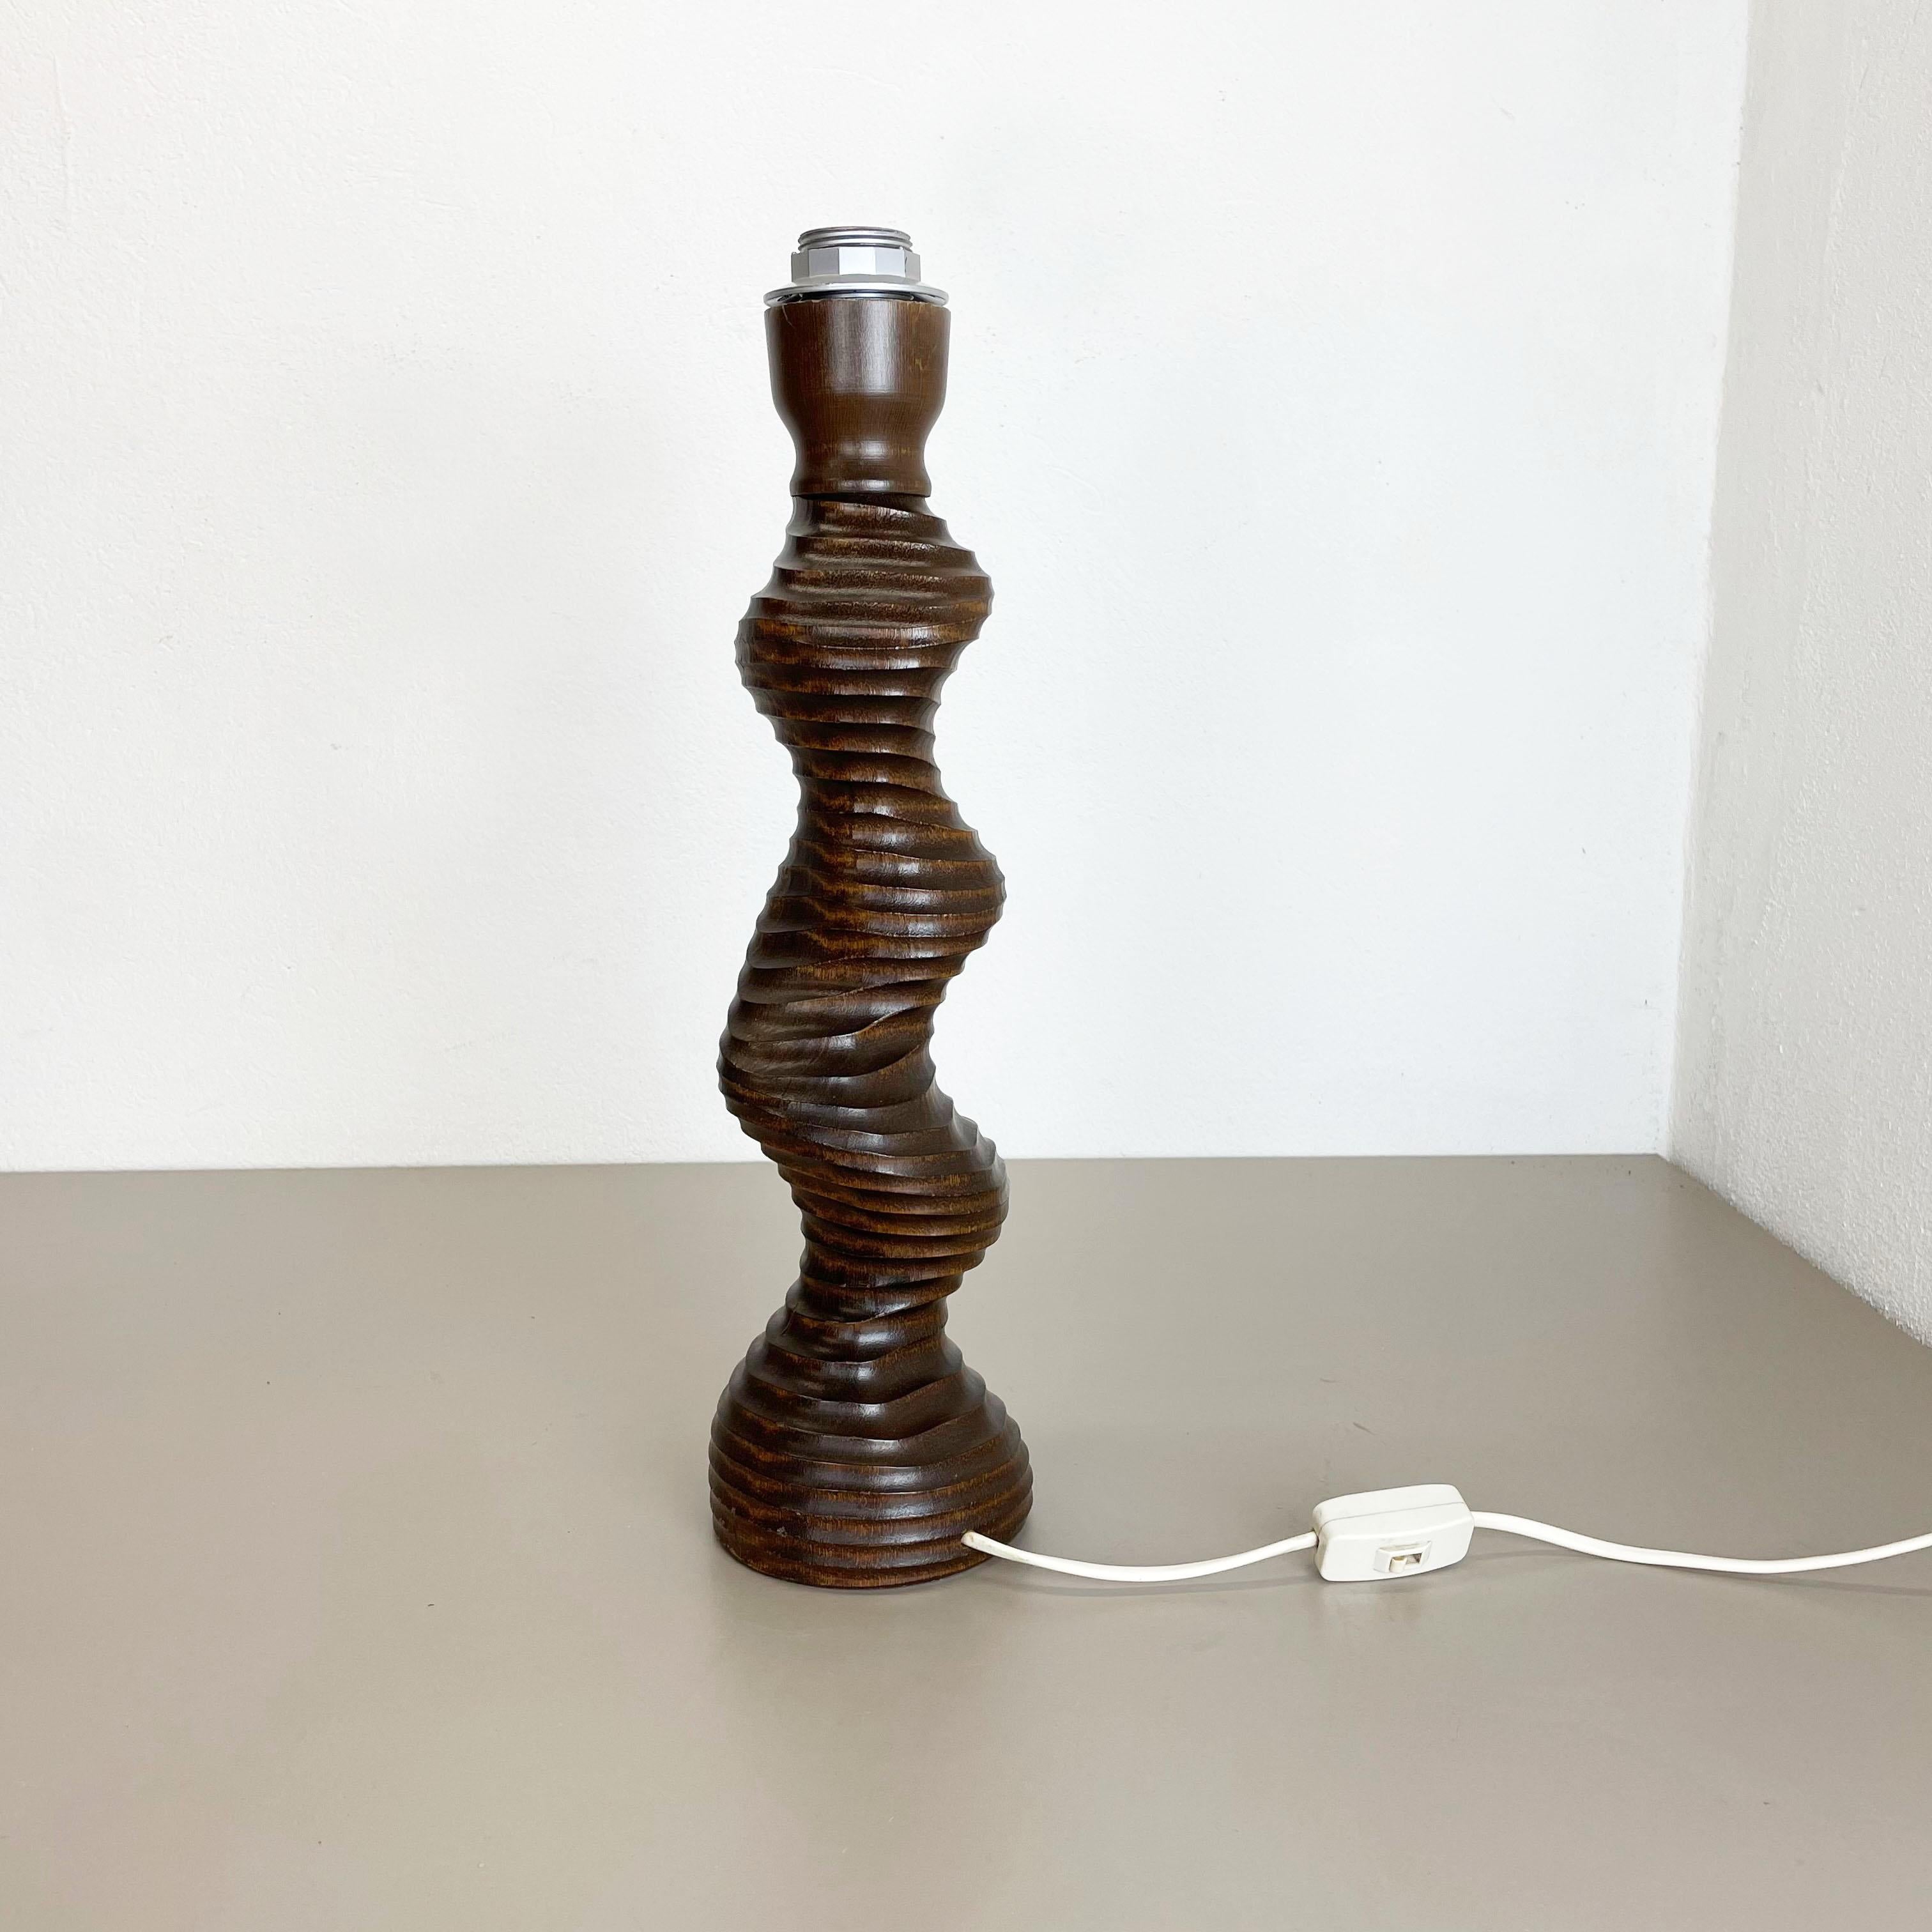 Large Organic Sculptural Wooden Table Light Made Temde Lights, Germany, 1970s In Good Condition For Sale In Kirchlengern, DE